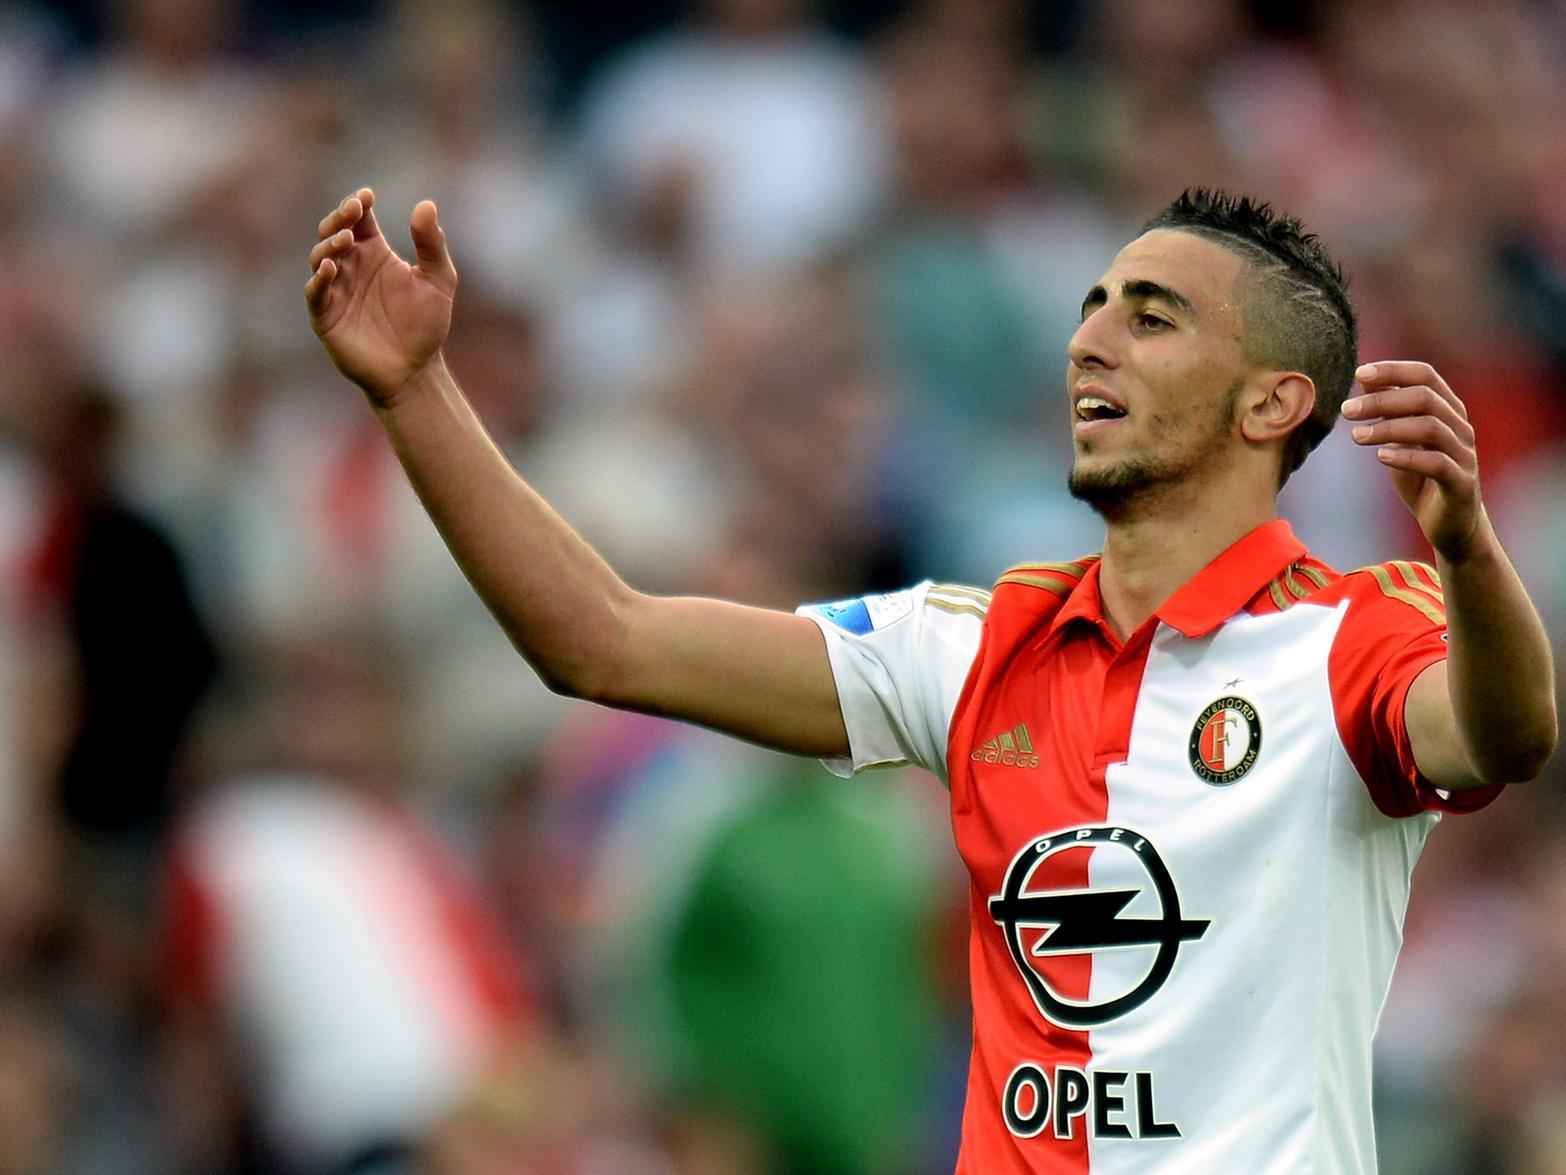 Hull City are said to be among a number of clubs targeting free agent winger Bilal Basacikoglu, who has previously played for Feyenoord and the TurkeyU21 side. (The 72)